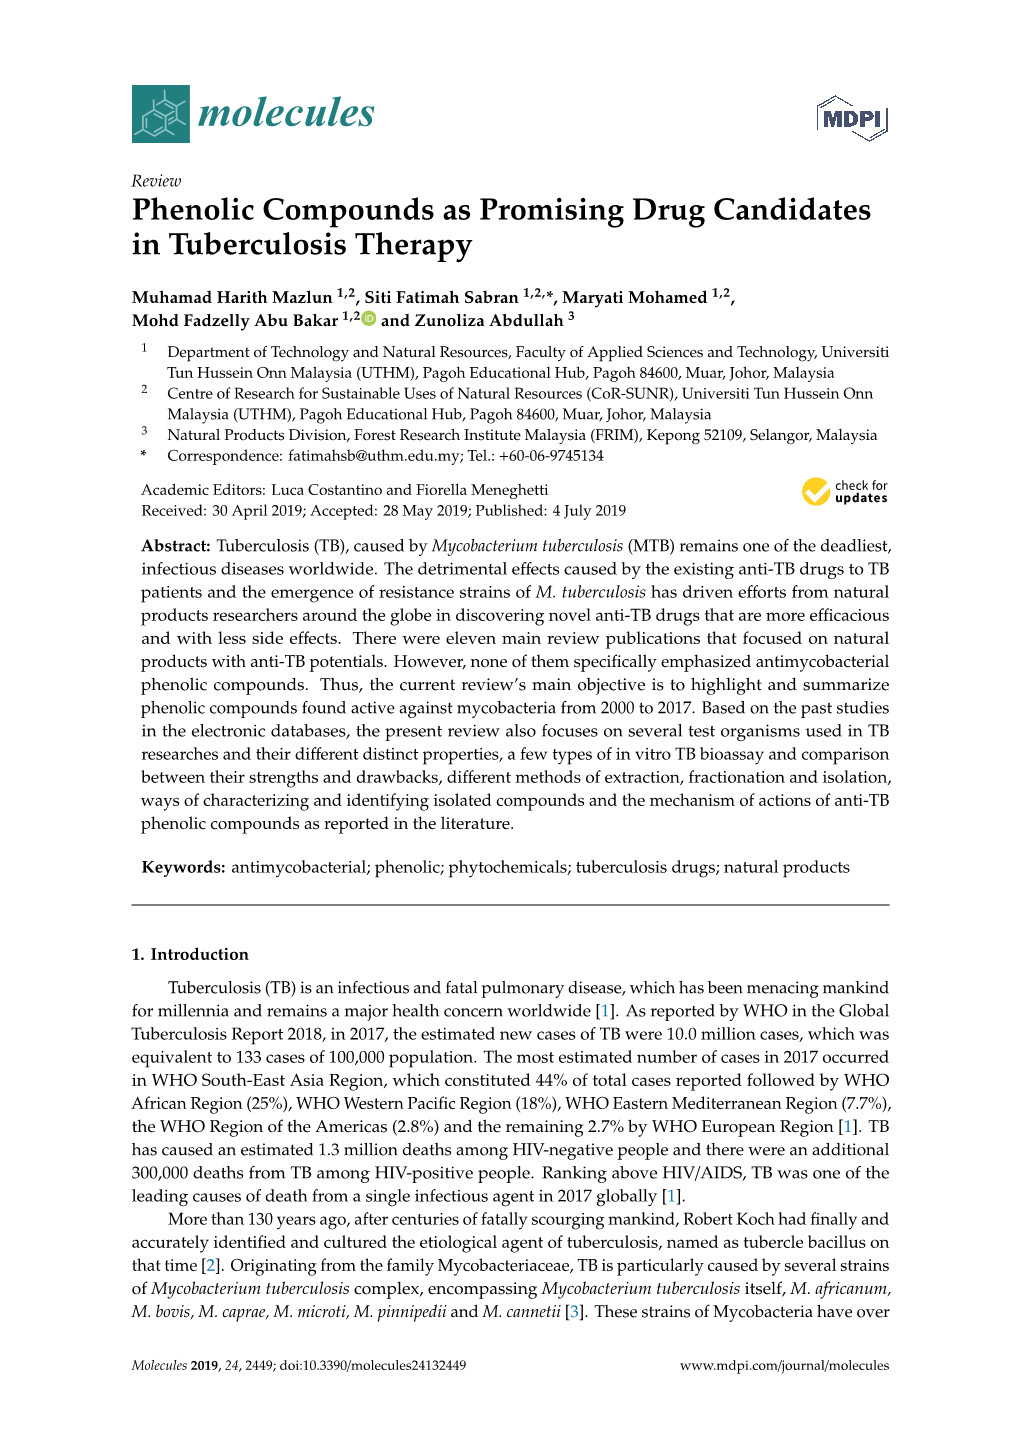 Phenolic Compounds As Promising Drug Candidates in Tuberculosis Therapy